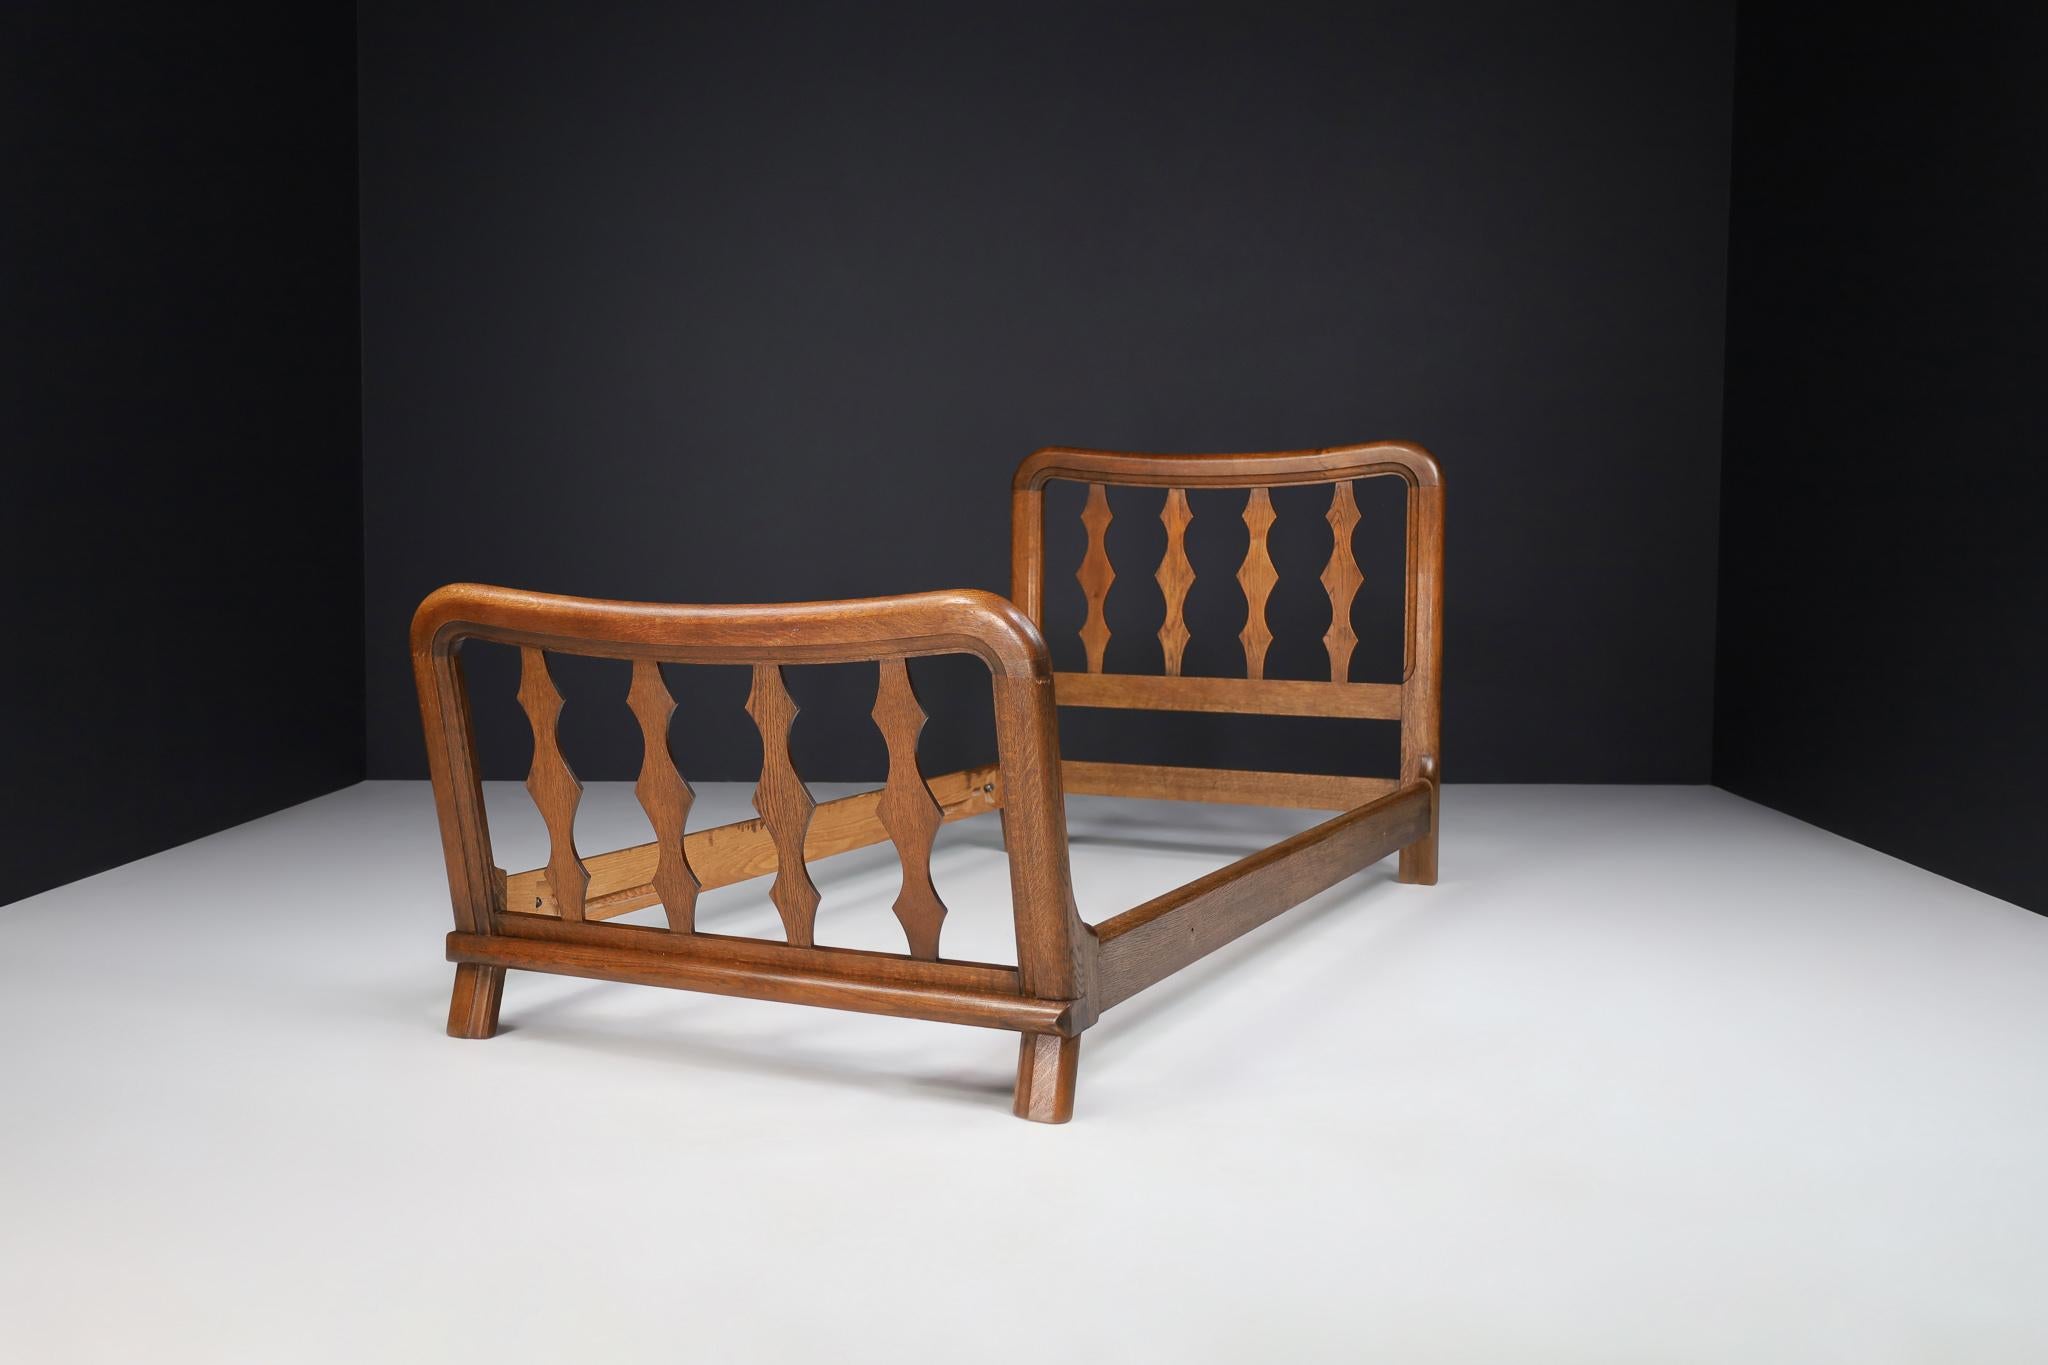 Mid-Century Modern Guillerme & Chambron Bed in Solid Oak, France 1960s

This beautiful bed was made in France in 1960 and has a crafted oak frame with gorgeous sculpted detailing on the slats. 

The company, Votre Maison, has marked the history